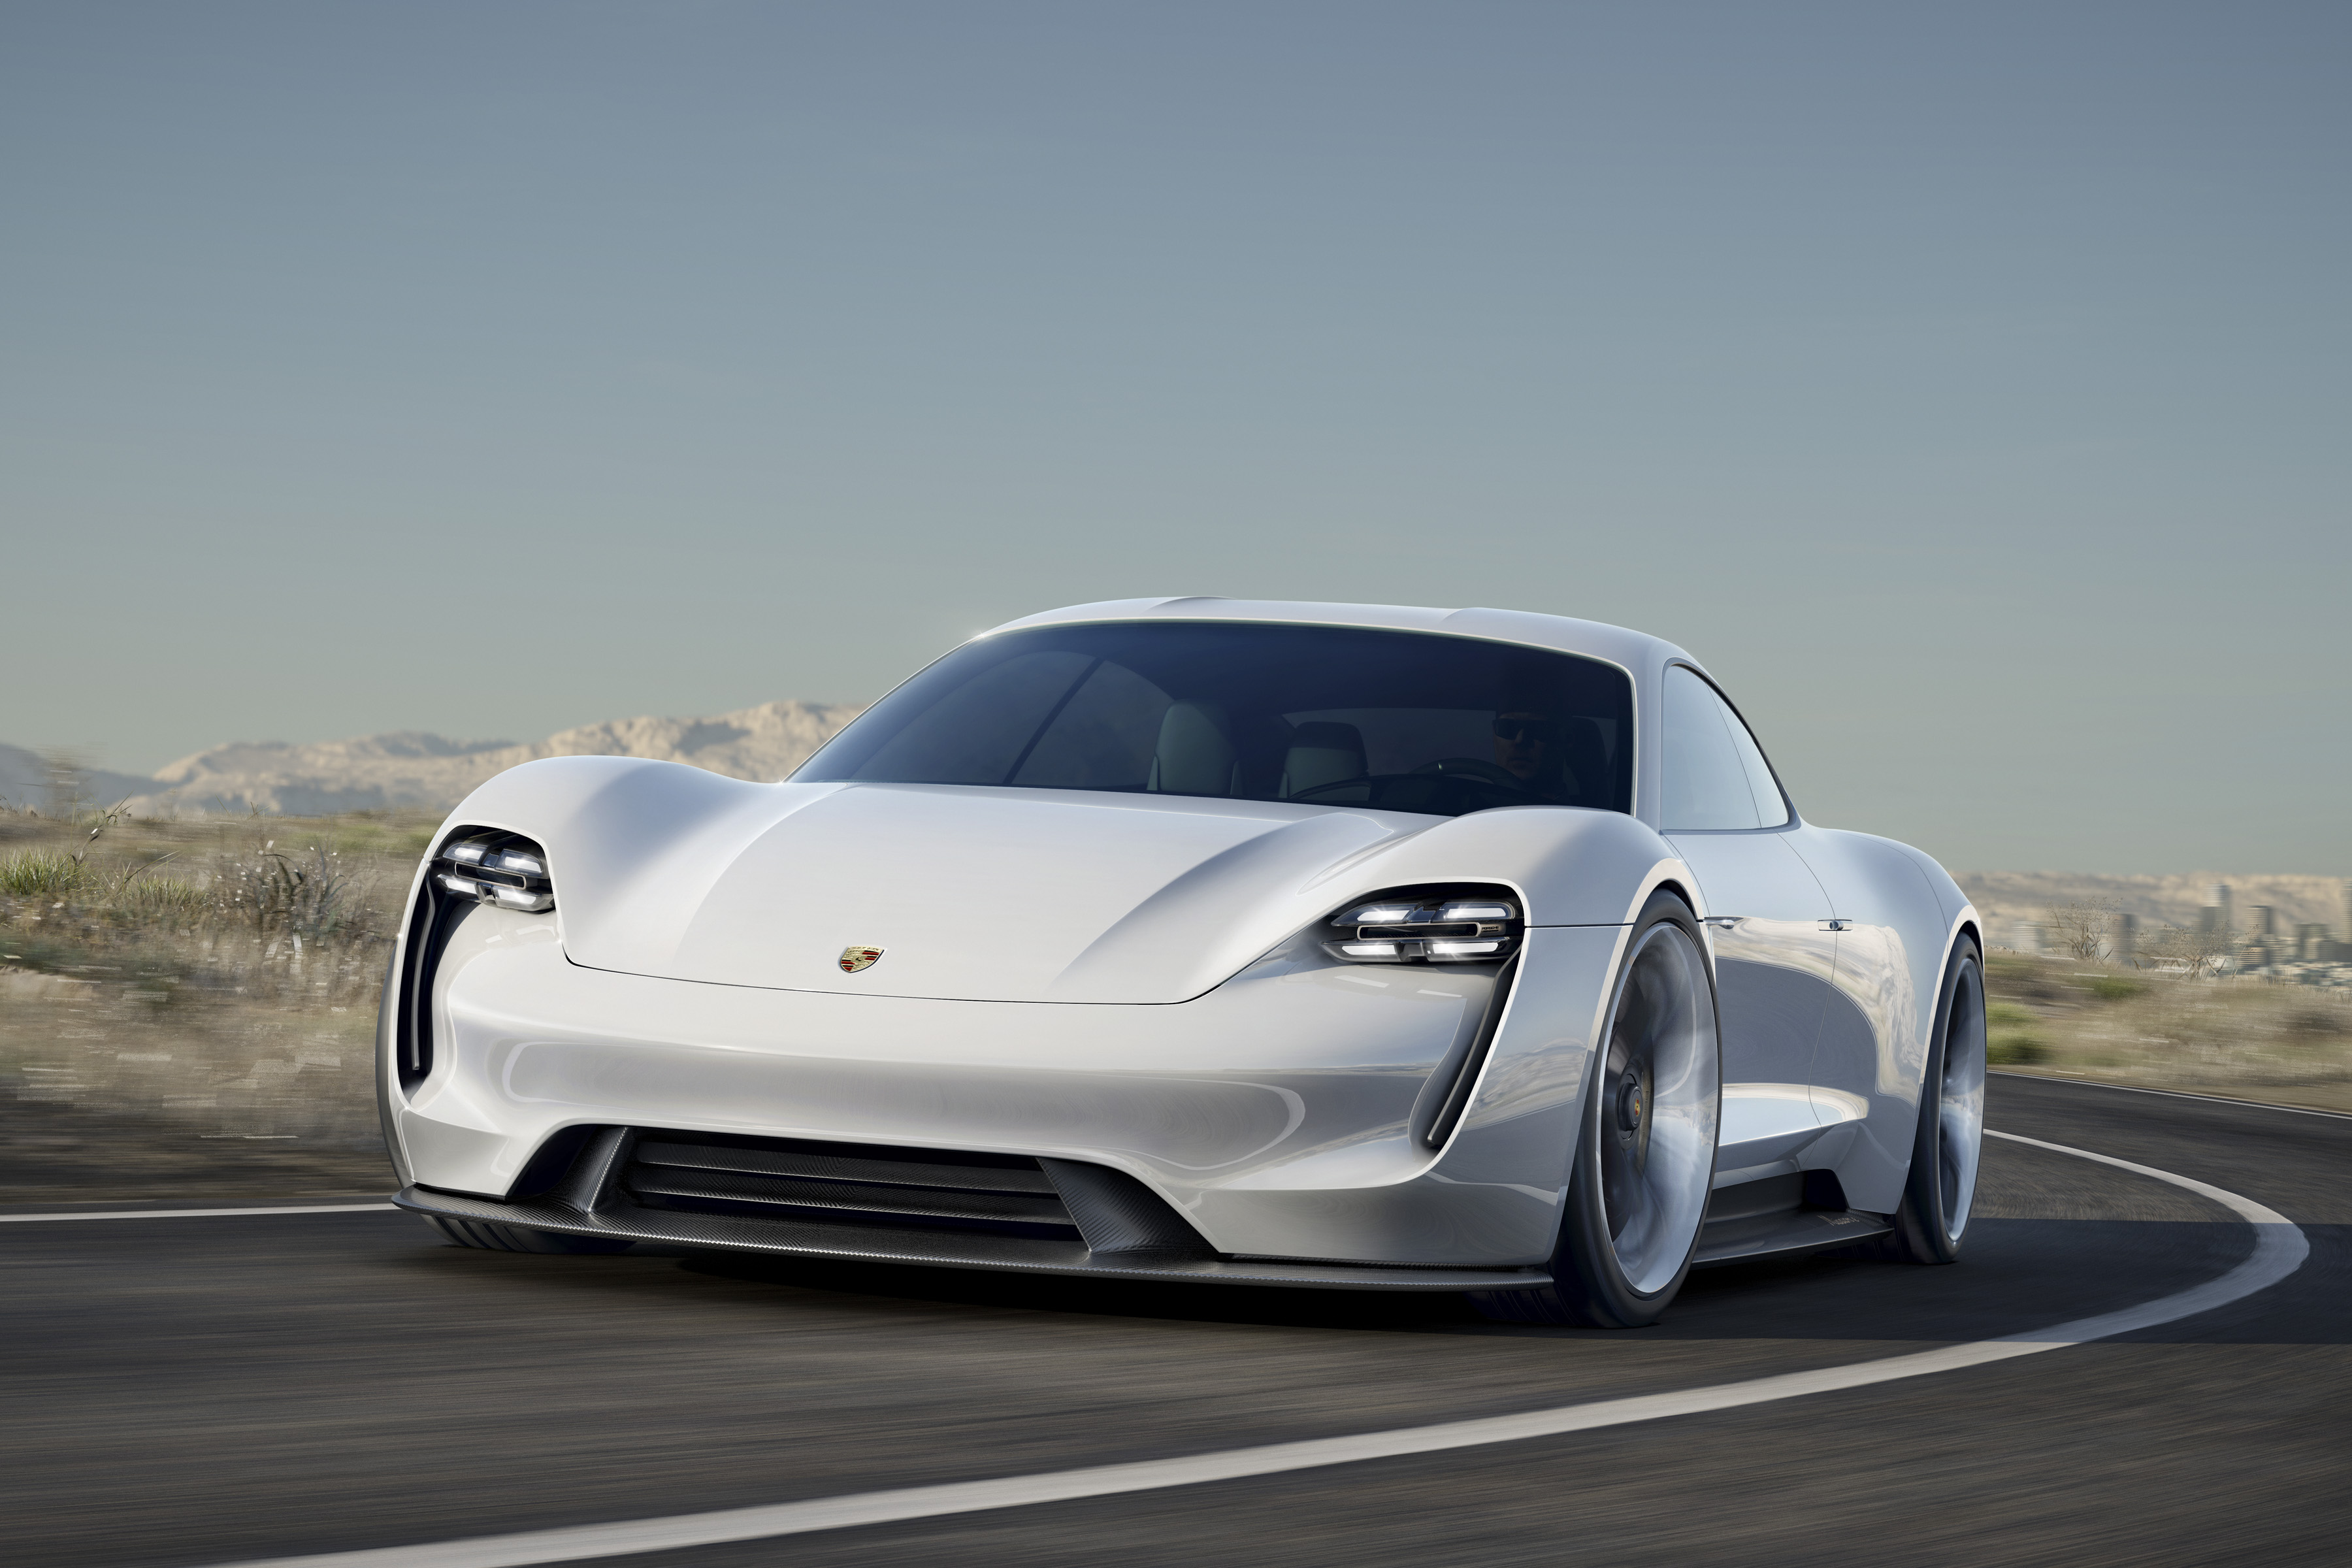 Porsche changes its mind on electric vehicles, plans 50 of its